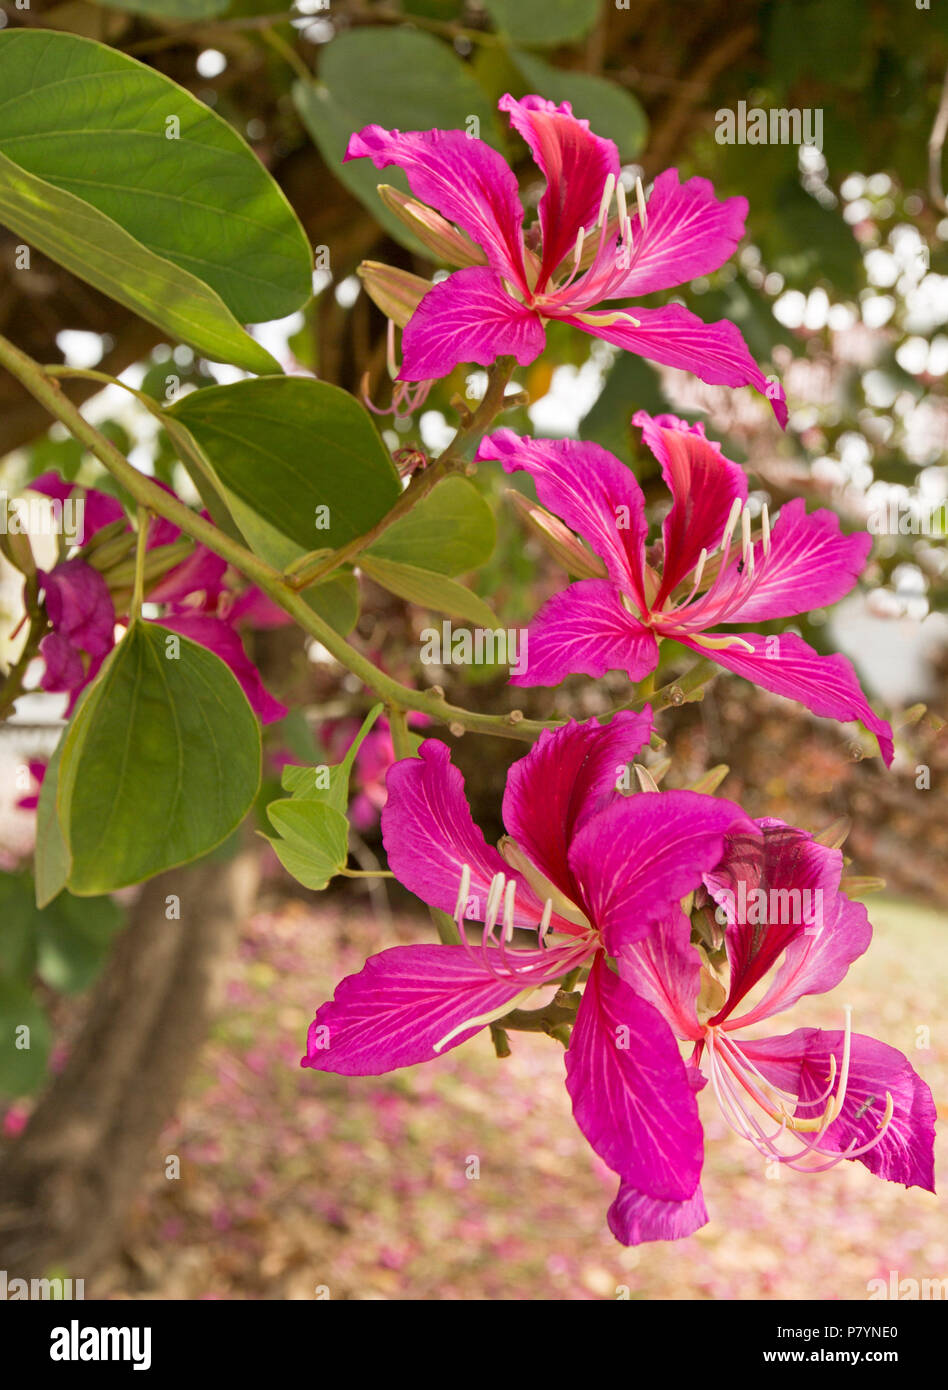 Stunning vivid pink / red flowers and leaves of Bauhinia blakeana, Orchid Tree, floral emblem of Hong Kong, growing in Qld Australia Stock Photo